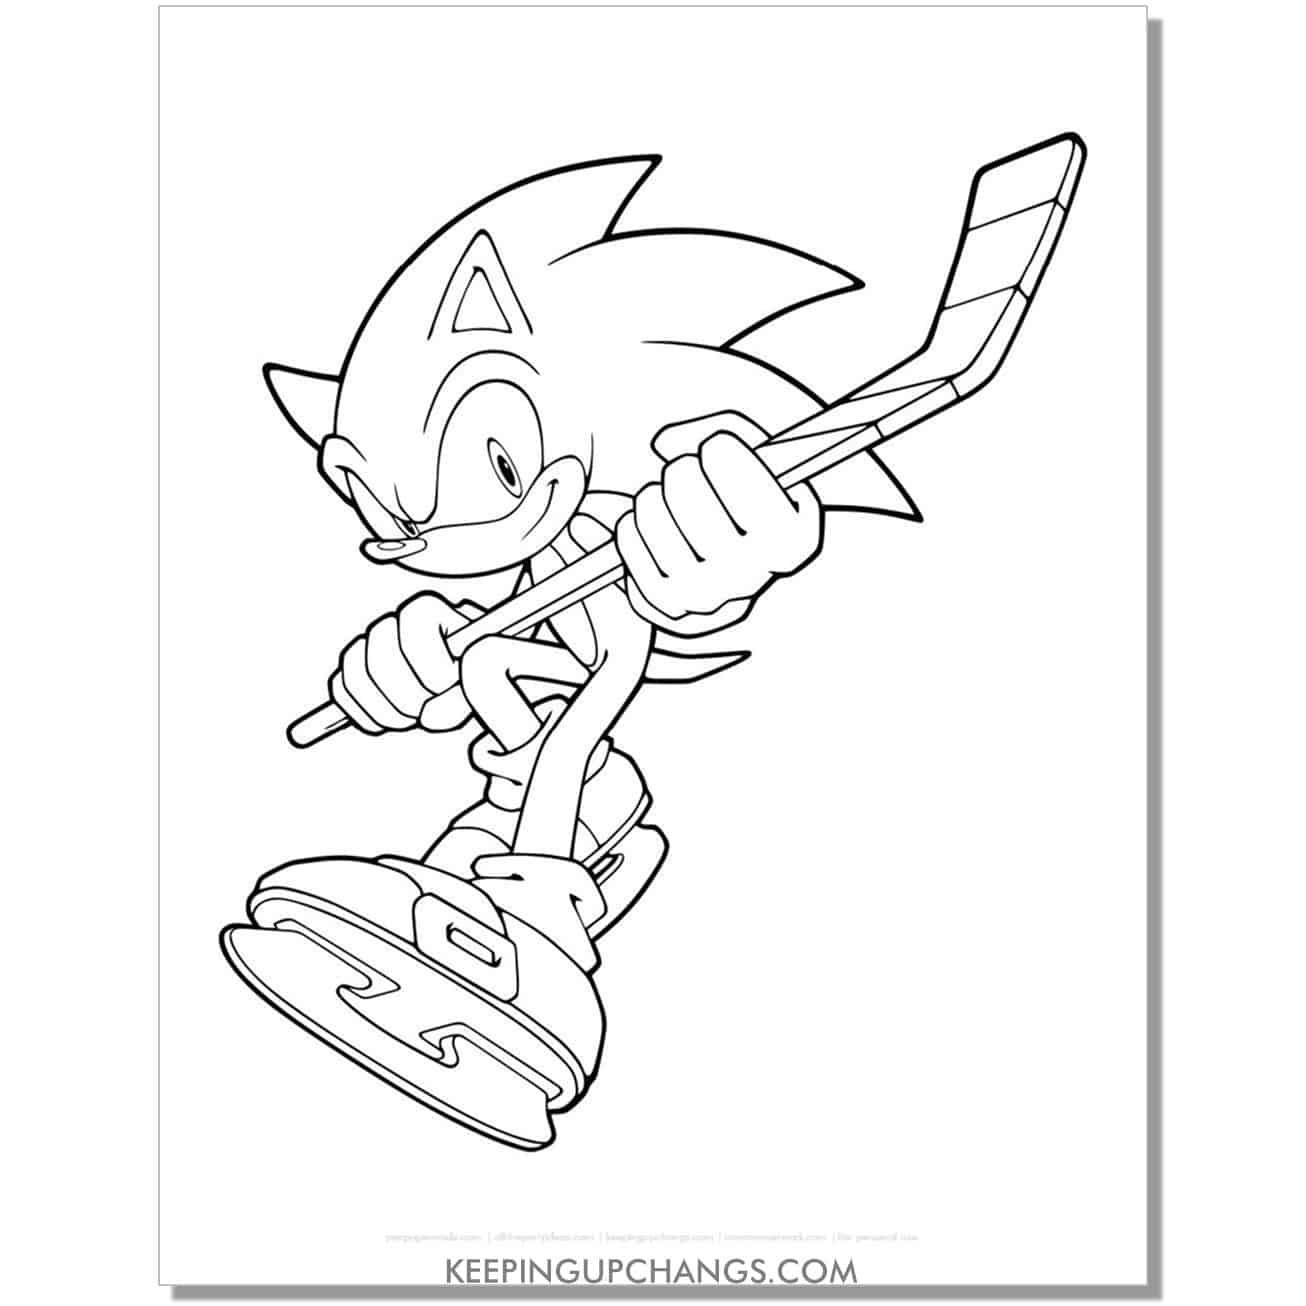 sonic with hockey stick and ice skates coloring page.